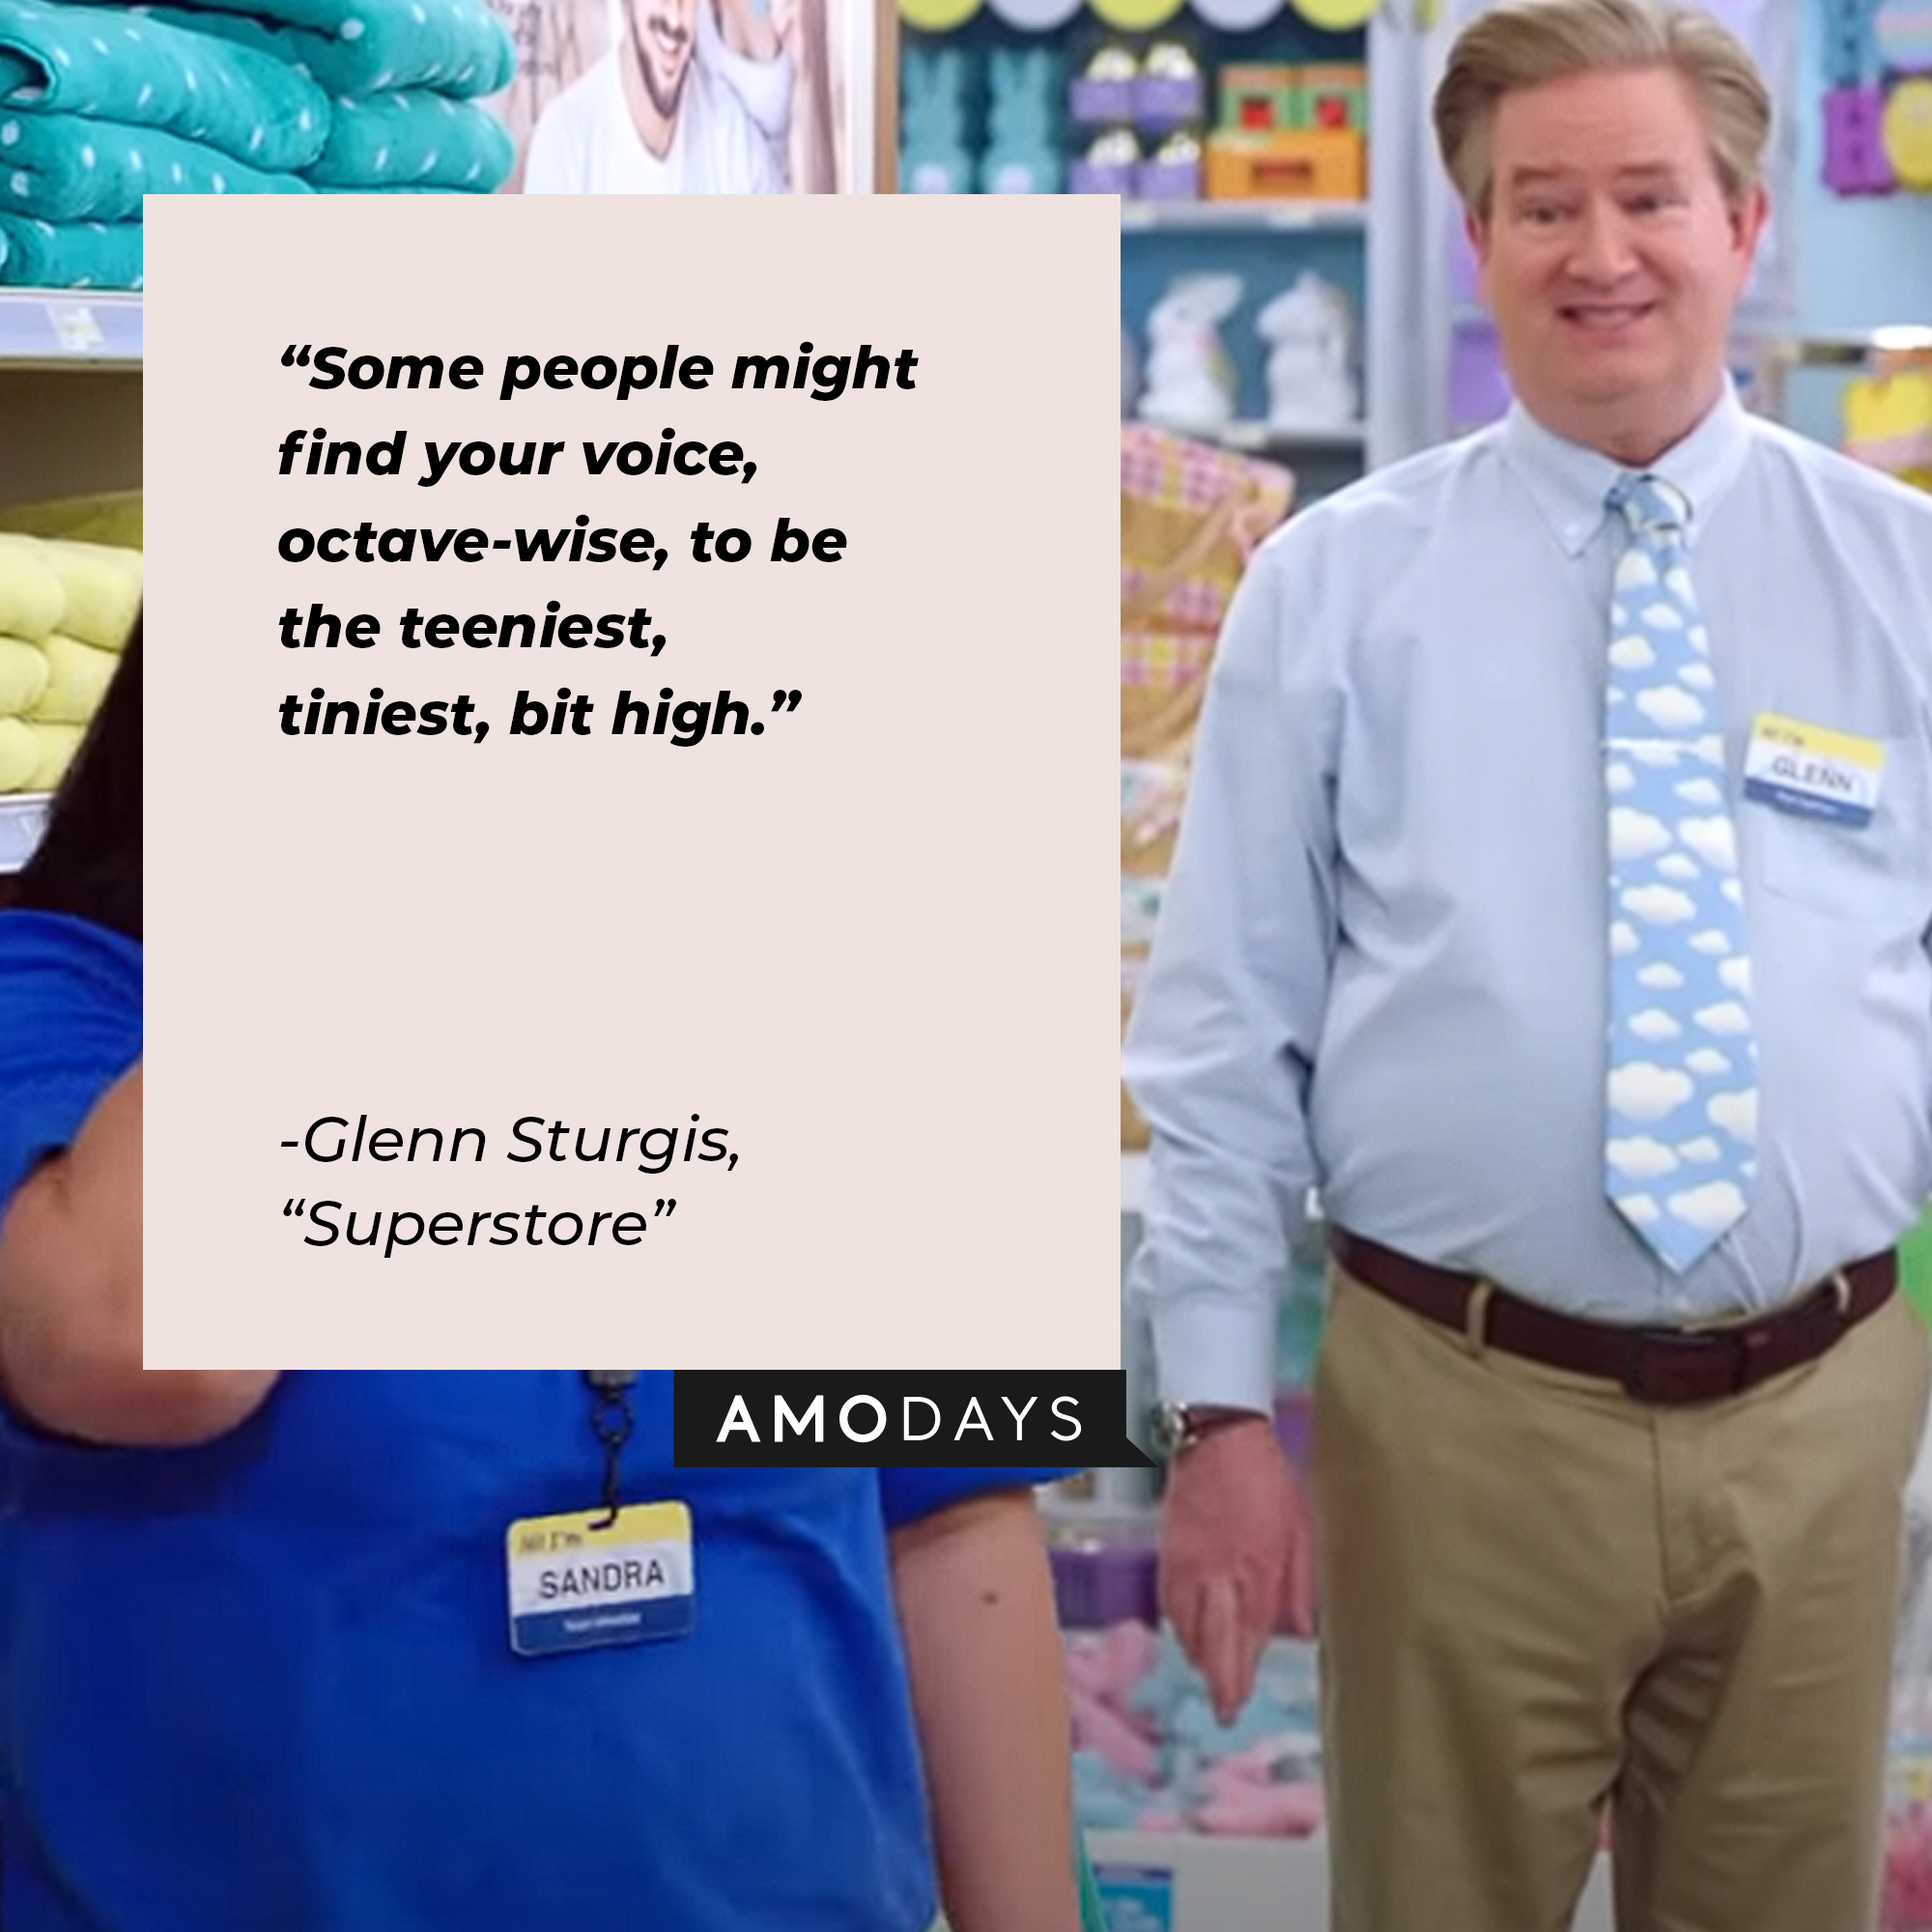 Image of Glenn Sturgis with the quote: “Some people might find your voice, octave-wise, to be the teeniest, tiniest, bit high.” | Source: Youtube.com/NBCSuperstore